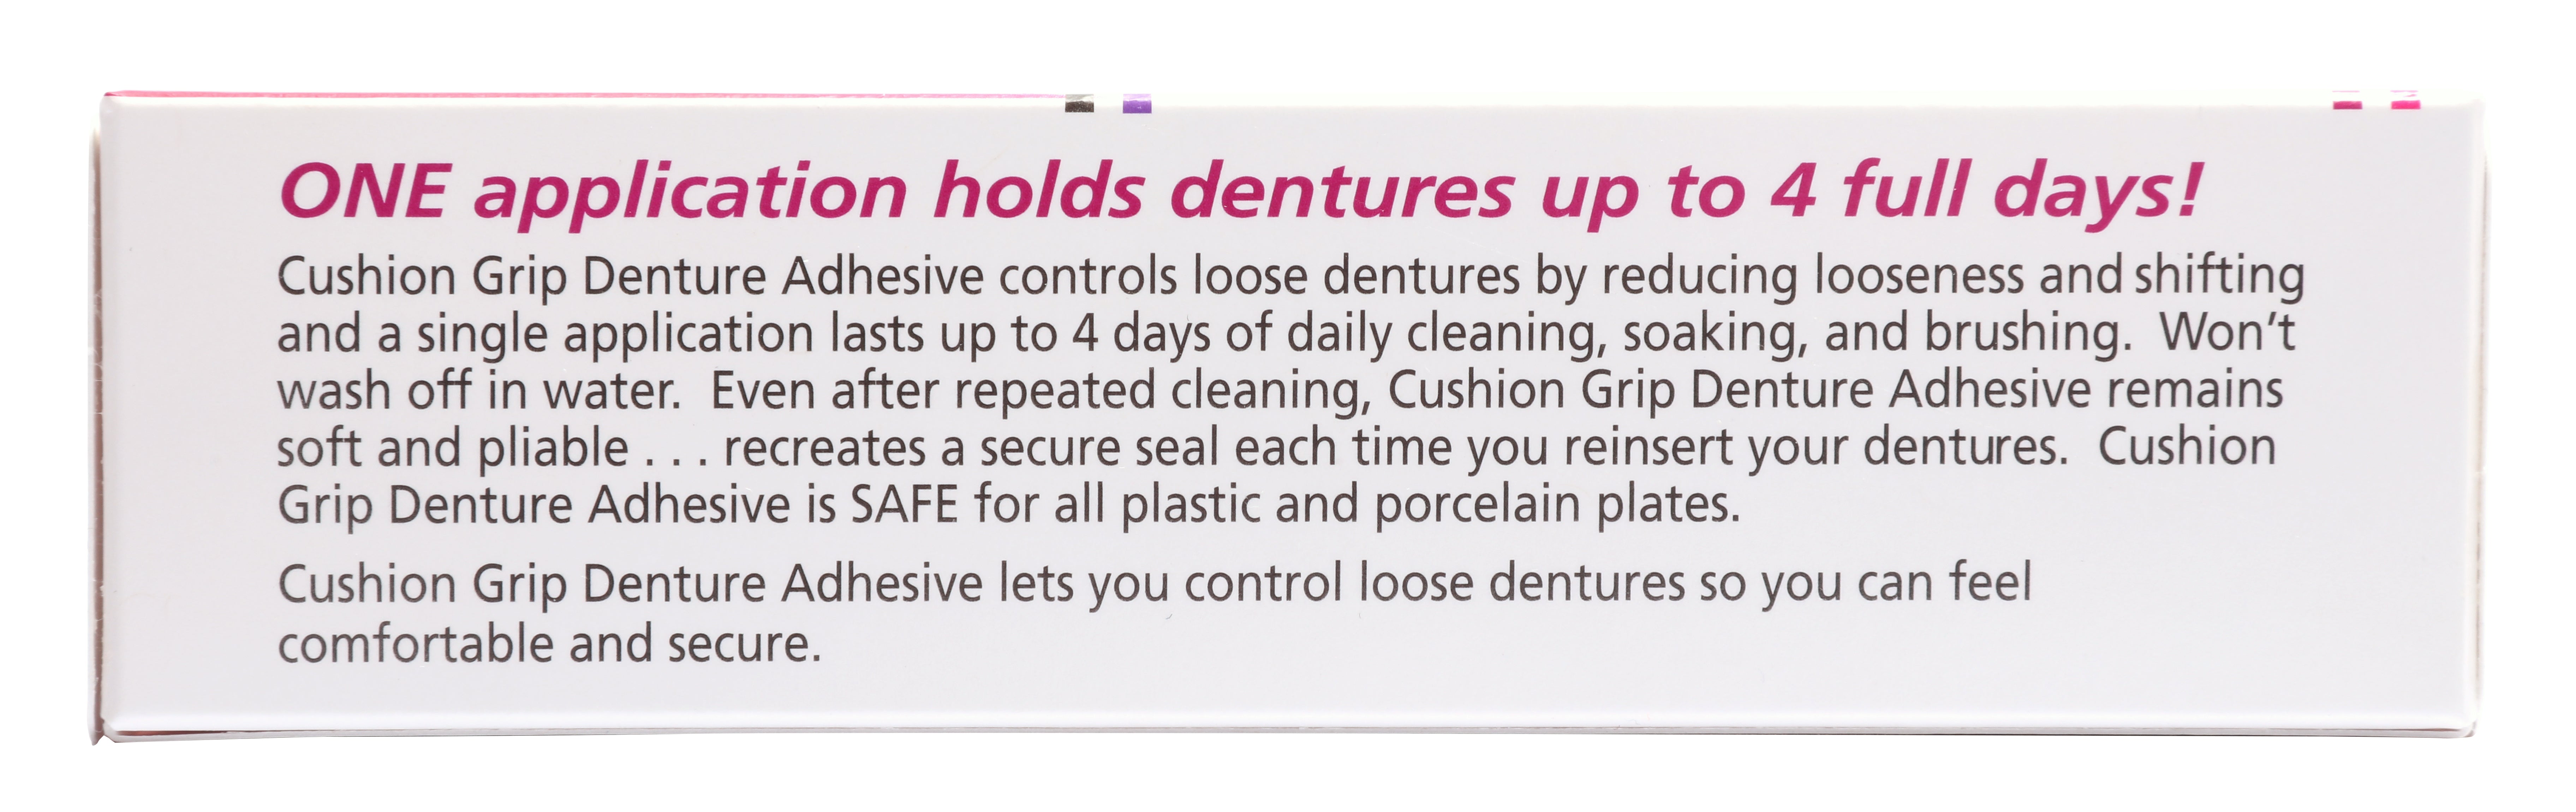 One application of Cushion grip holds dentures up to 4 full days. Cushion grip Denture Adhesive controls loose dentures by reducing looseness. It remains soft and pliable, recreating a secured seal each time you reinsert your dentures.